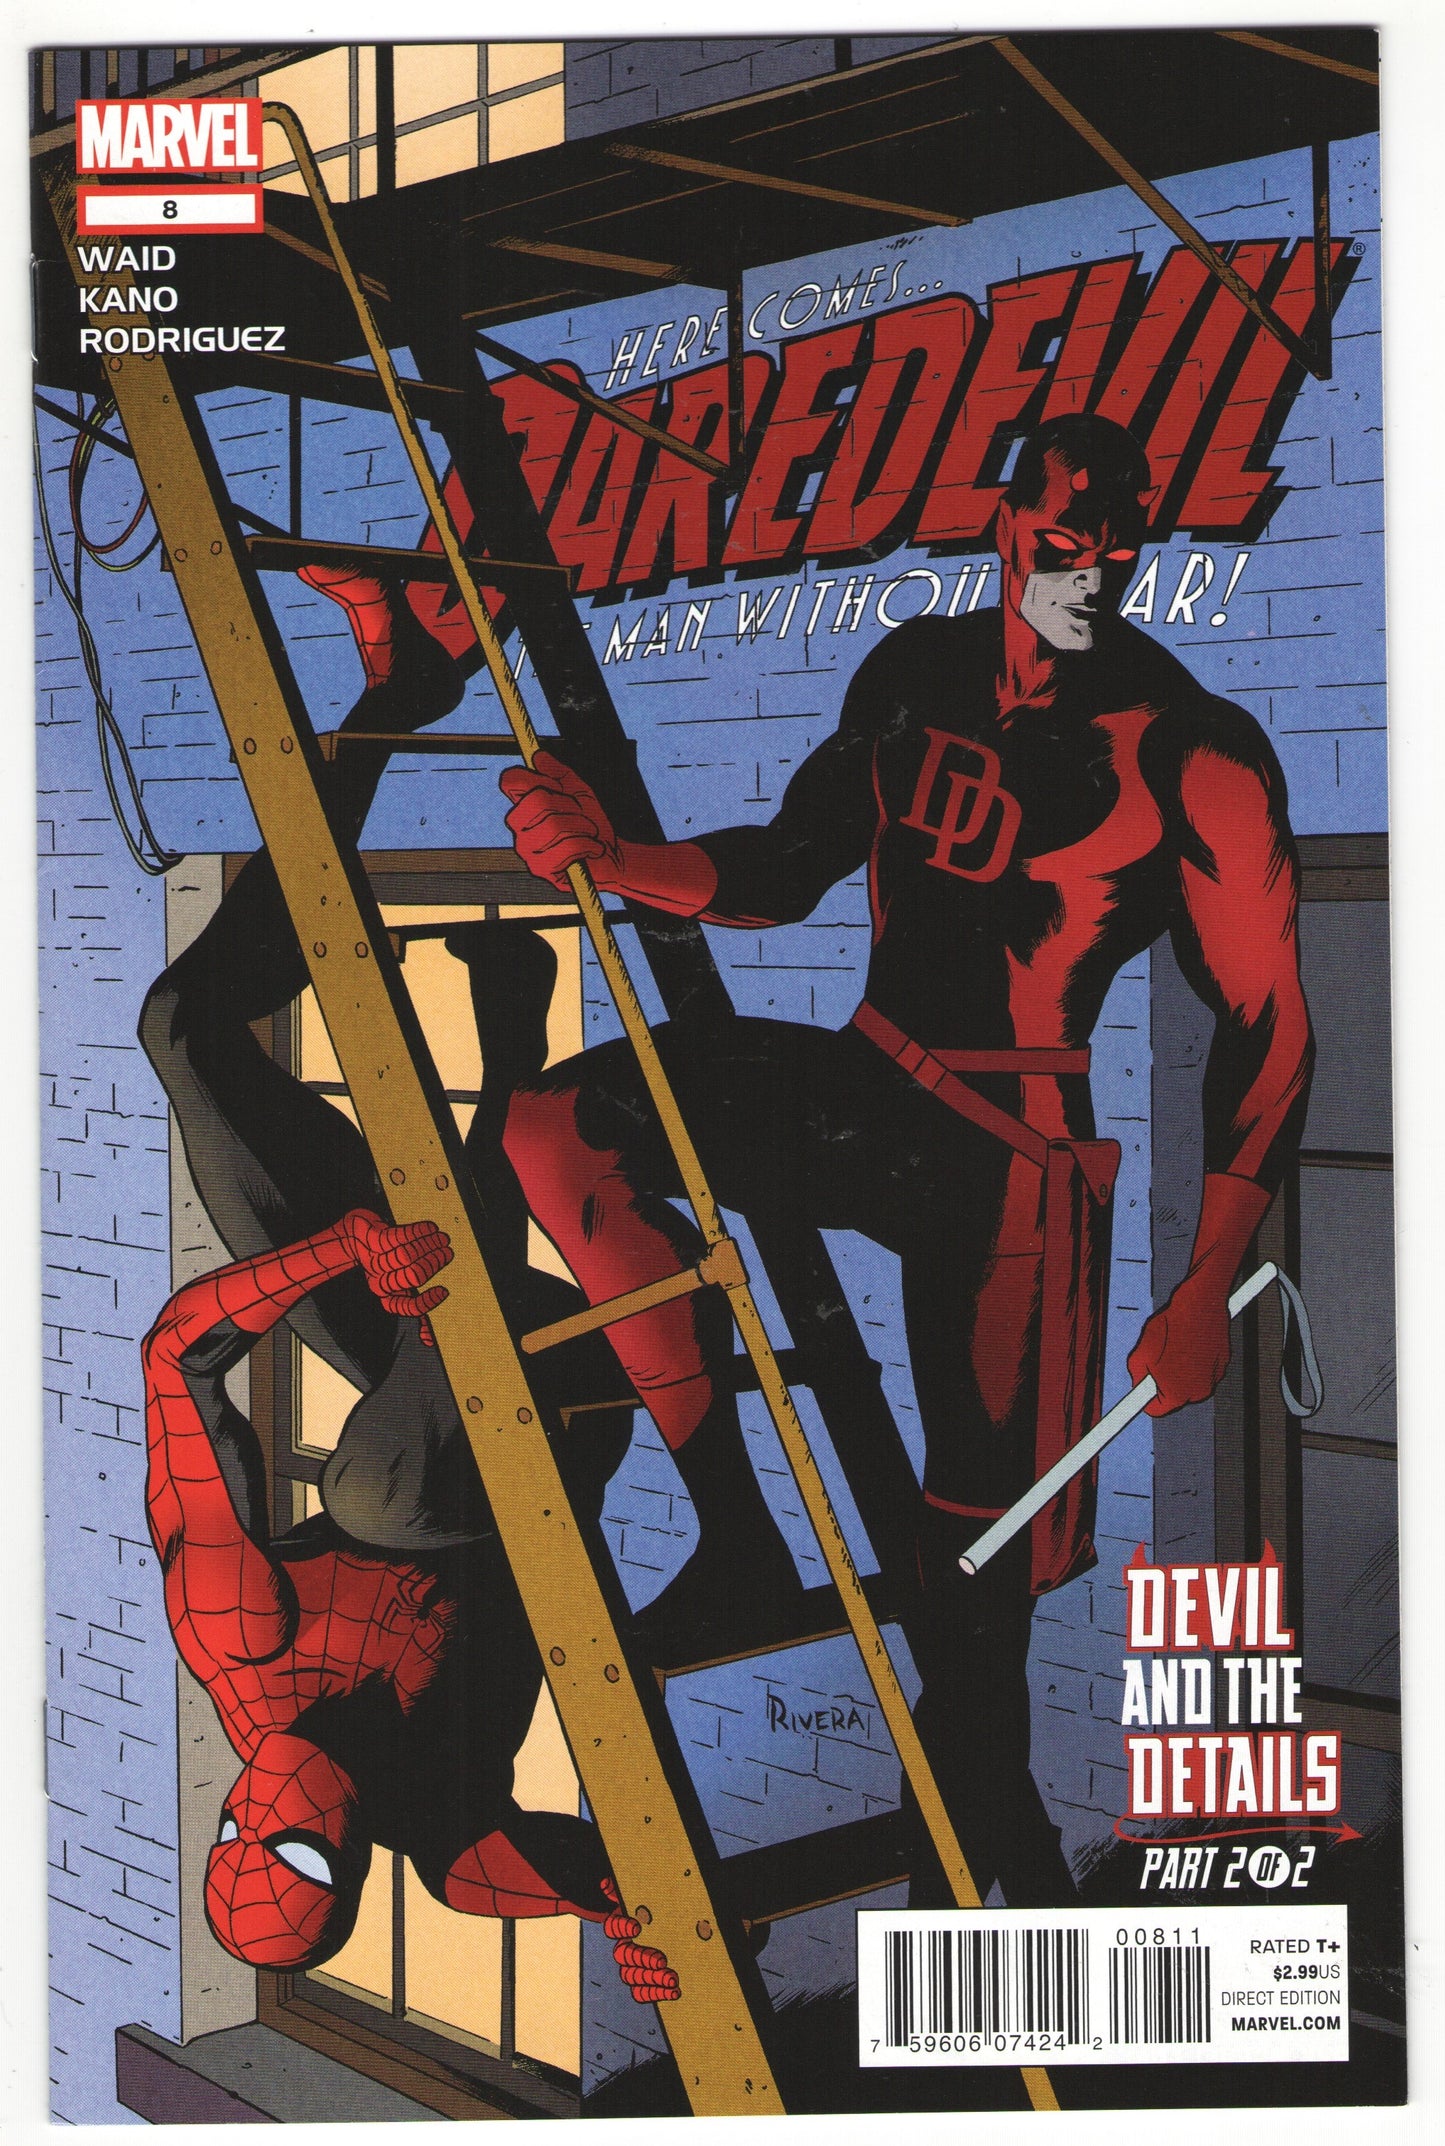 “Devil and the Details” Complete Crossover Story Arc (2012)